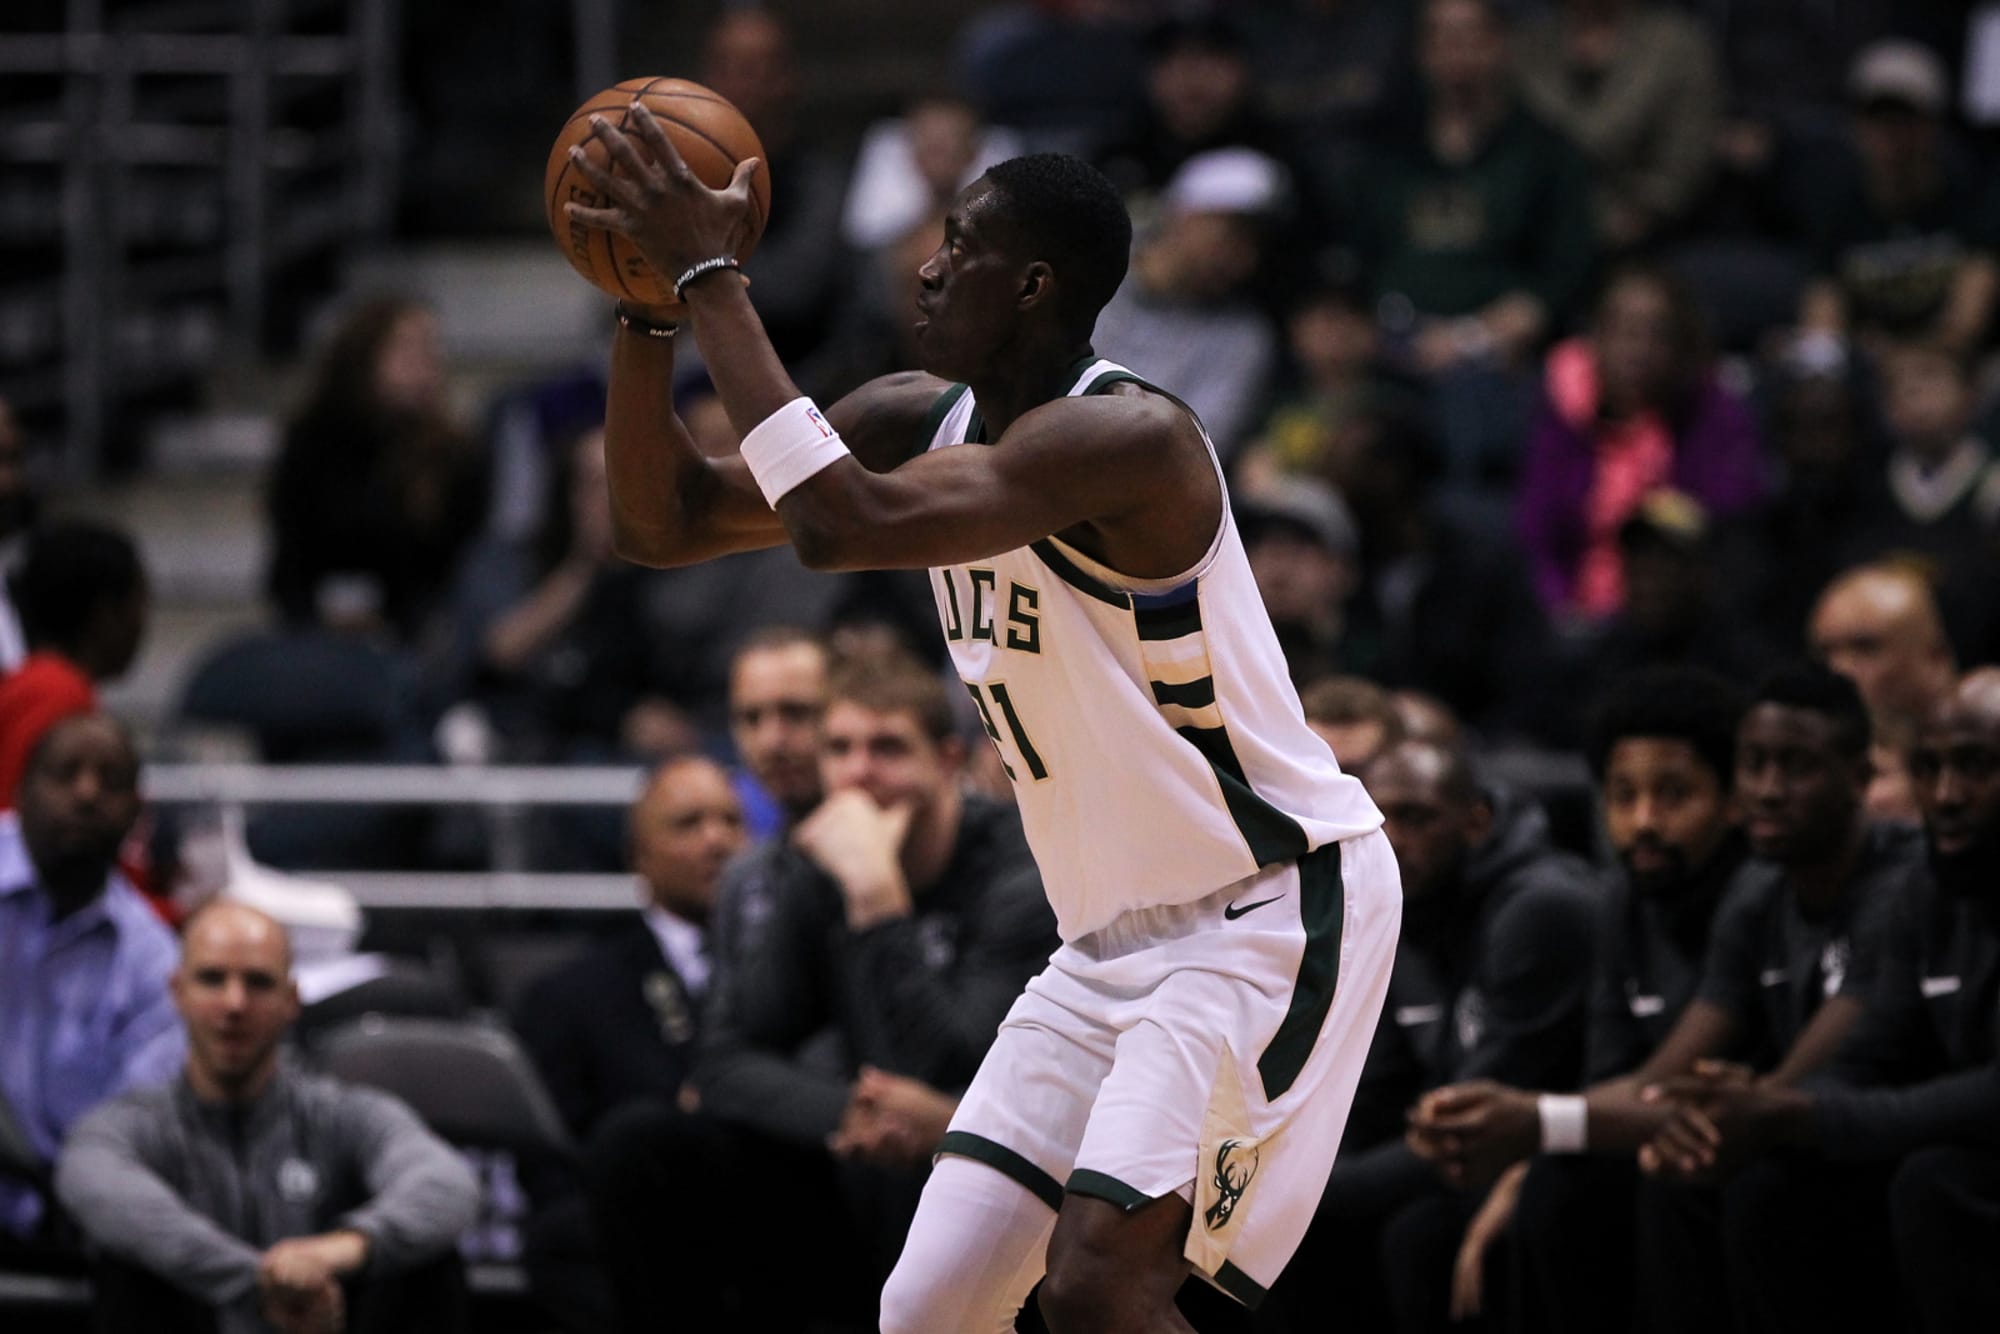 Who is Tony Snell? An in-depth look at the guy the Bucks got for MCW